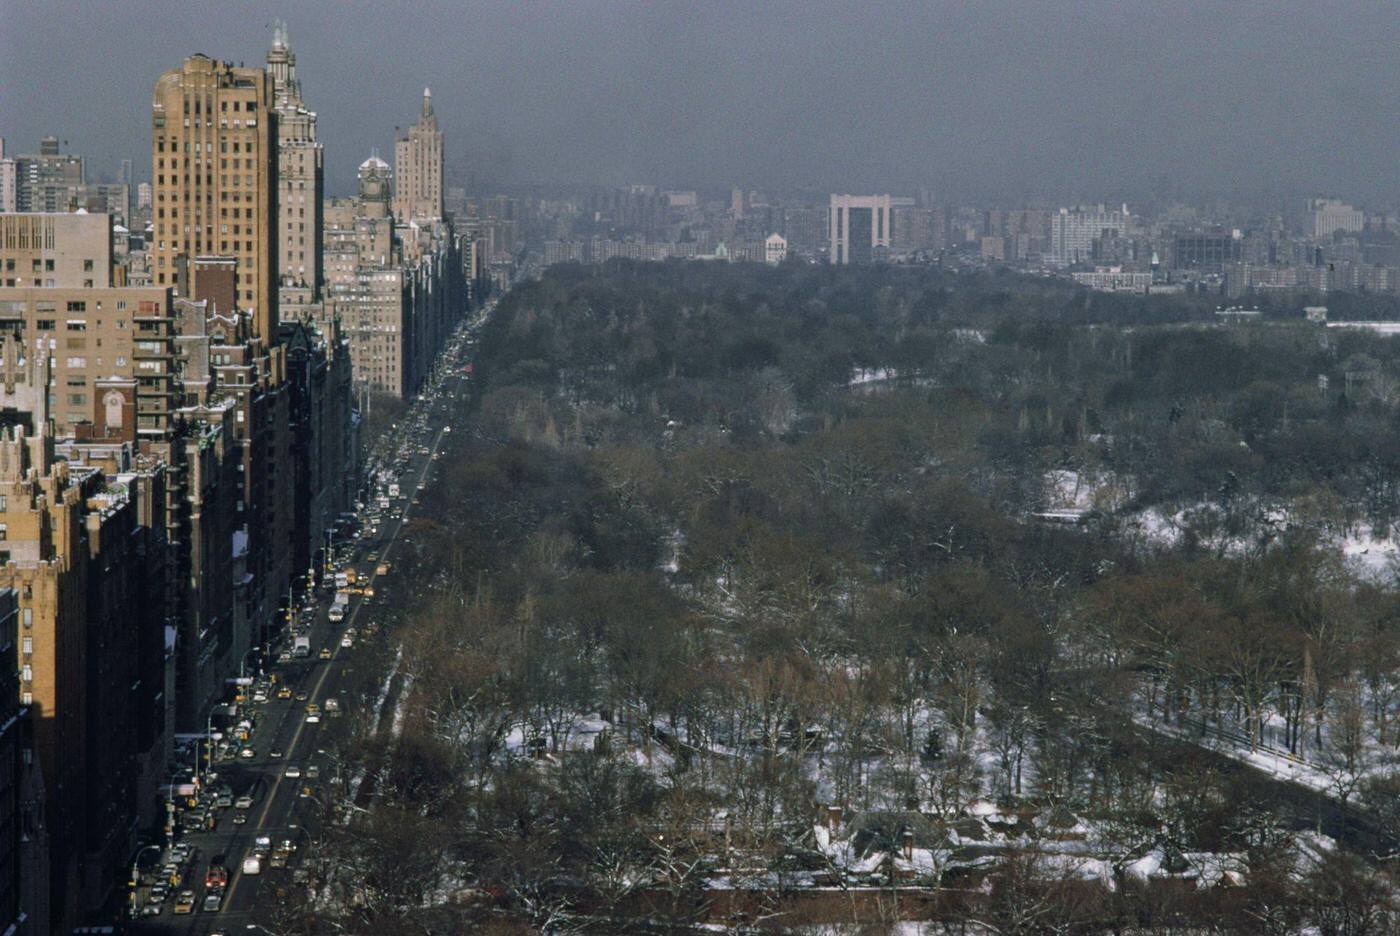 A High-Angle View Of Central Park, Looking North From 59Th Street, Manhattan, 1984